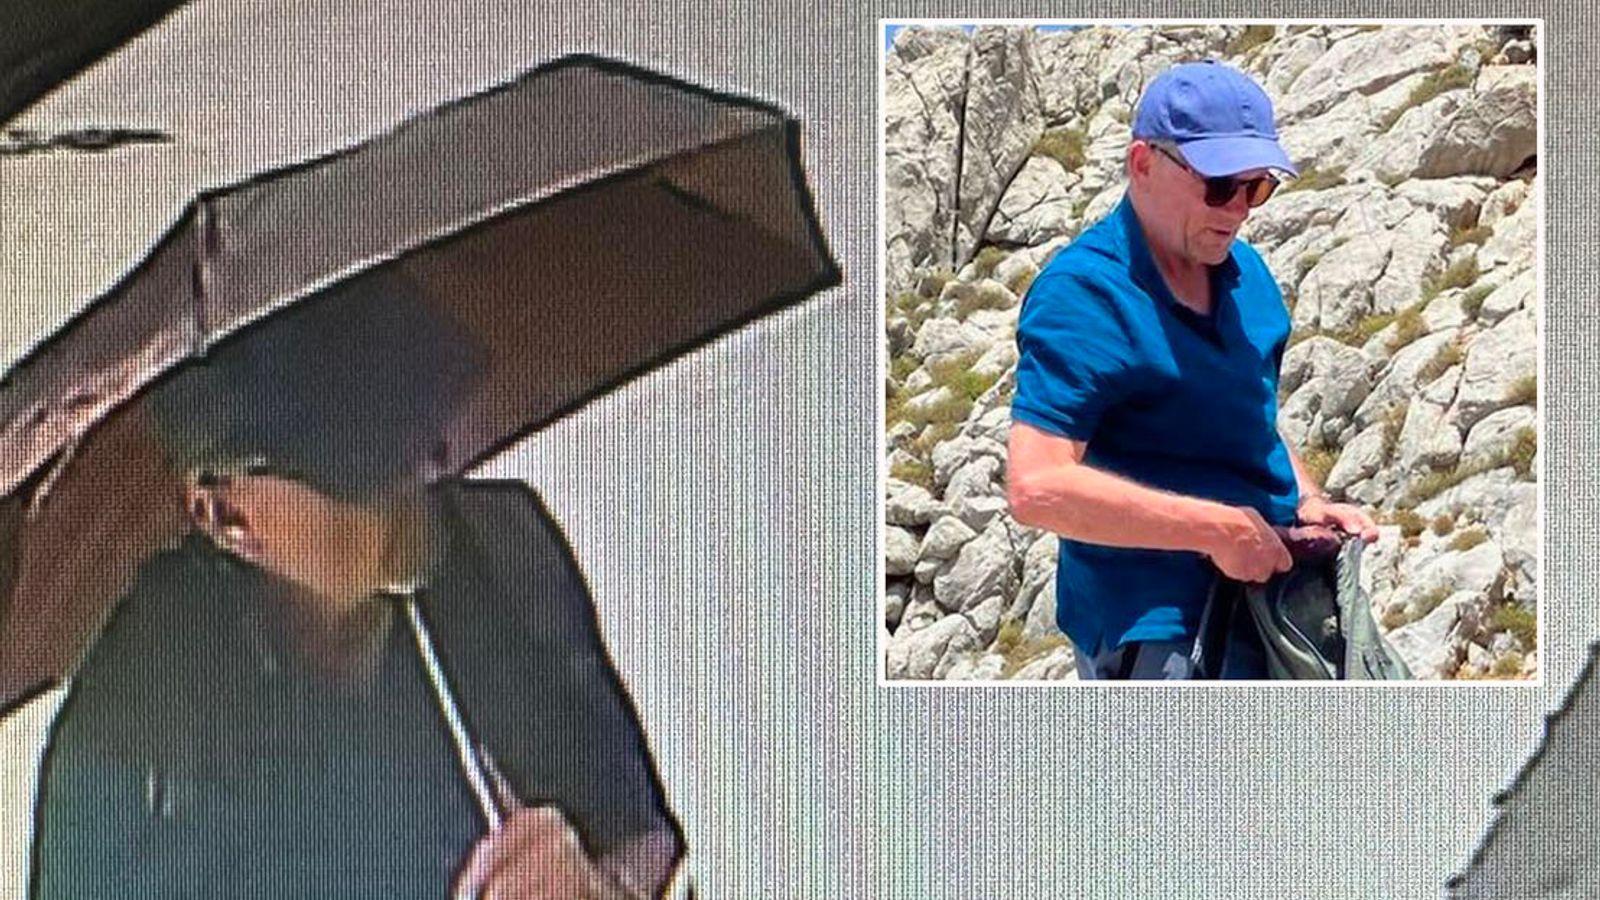 Michael Mosley: New CCTV images show last sighting of missing TV doctor